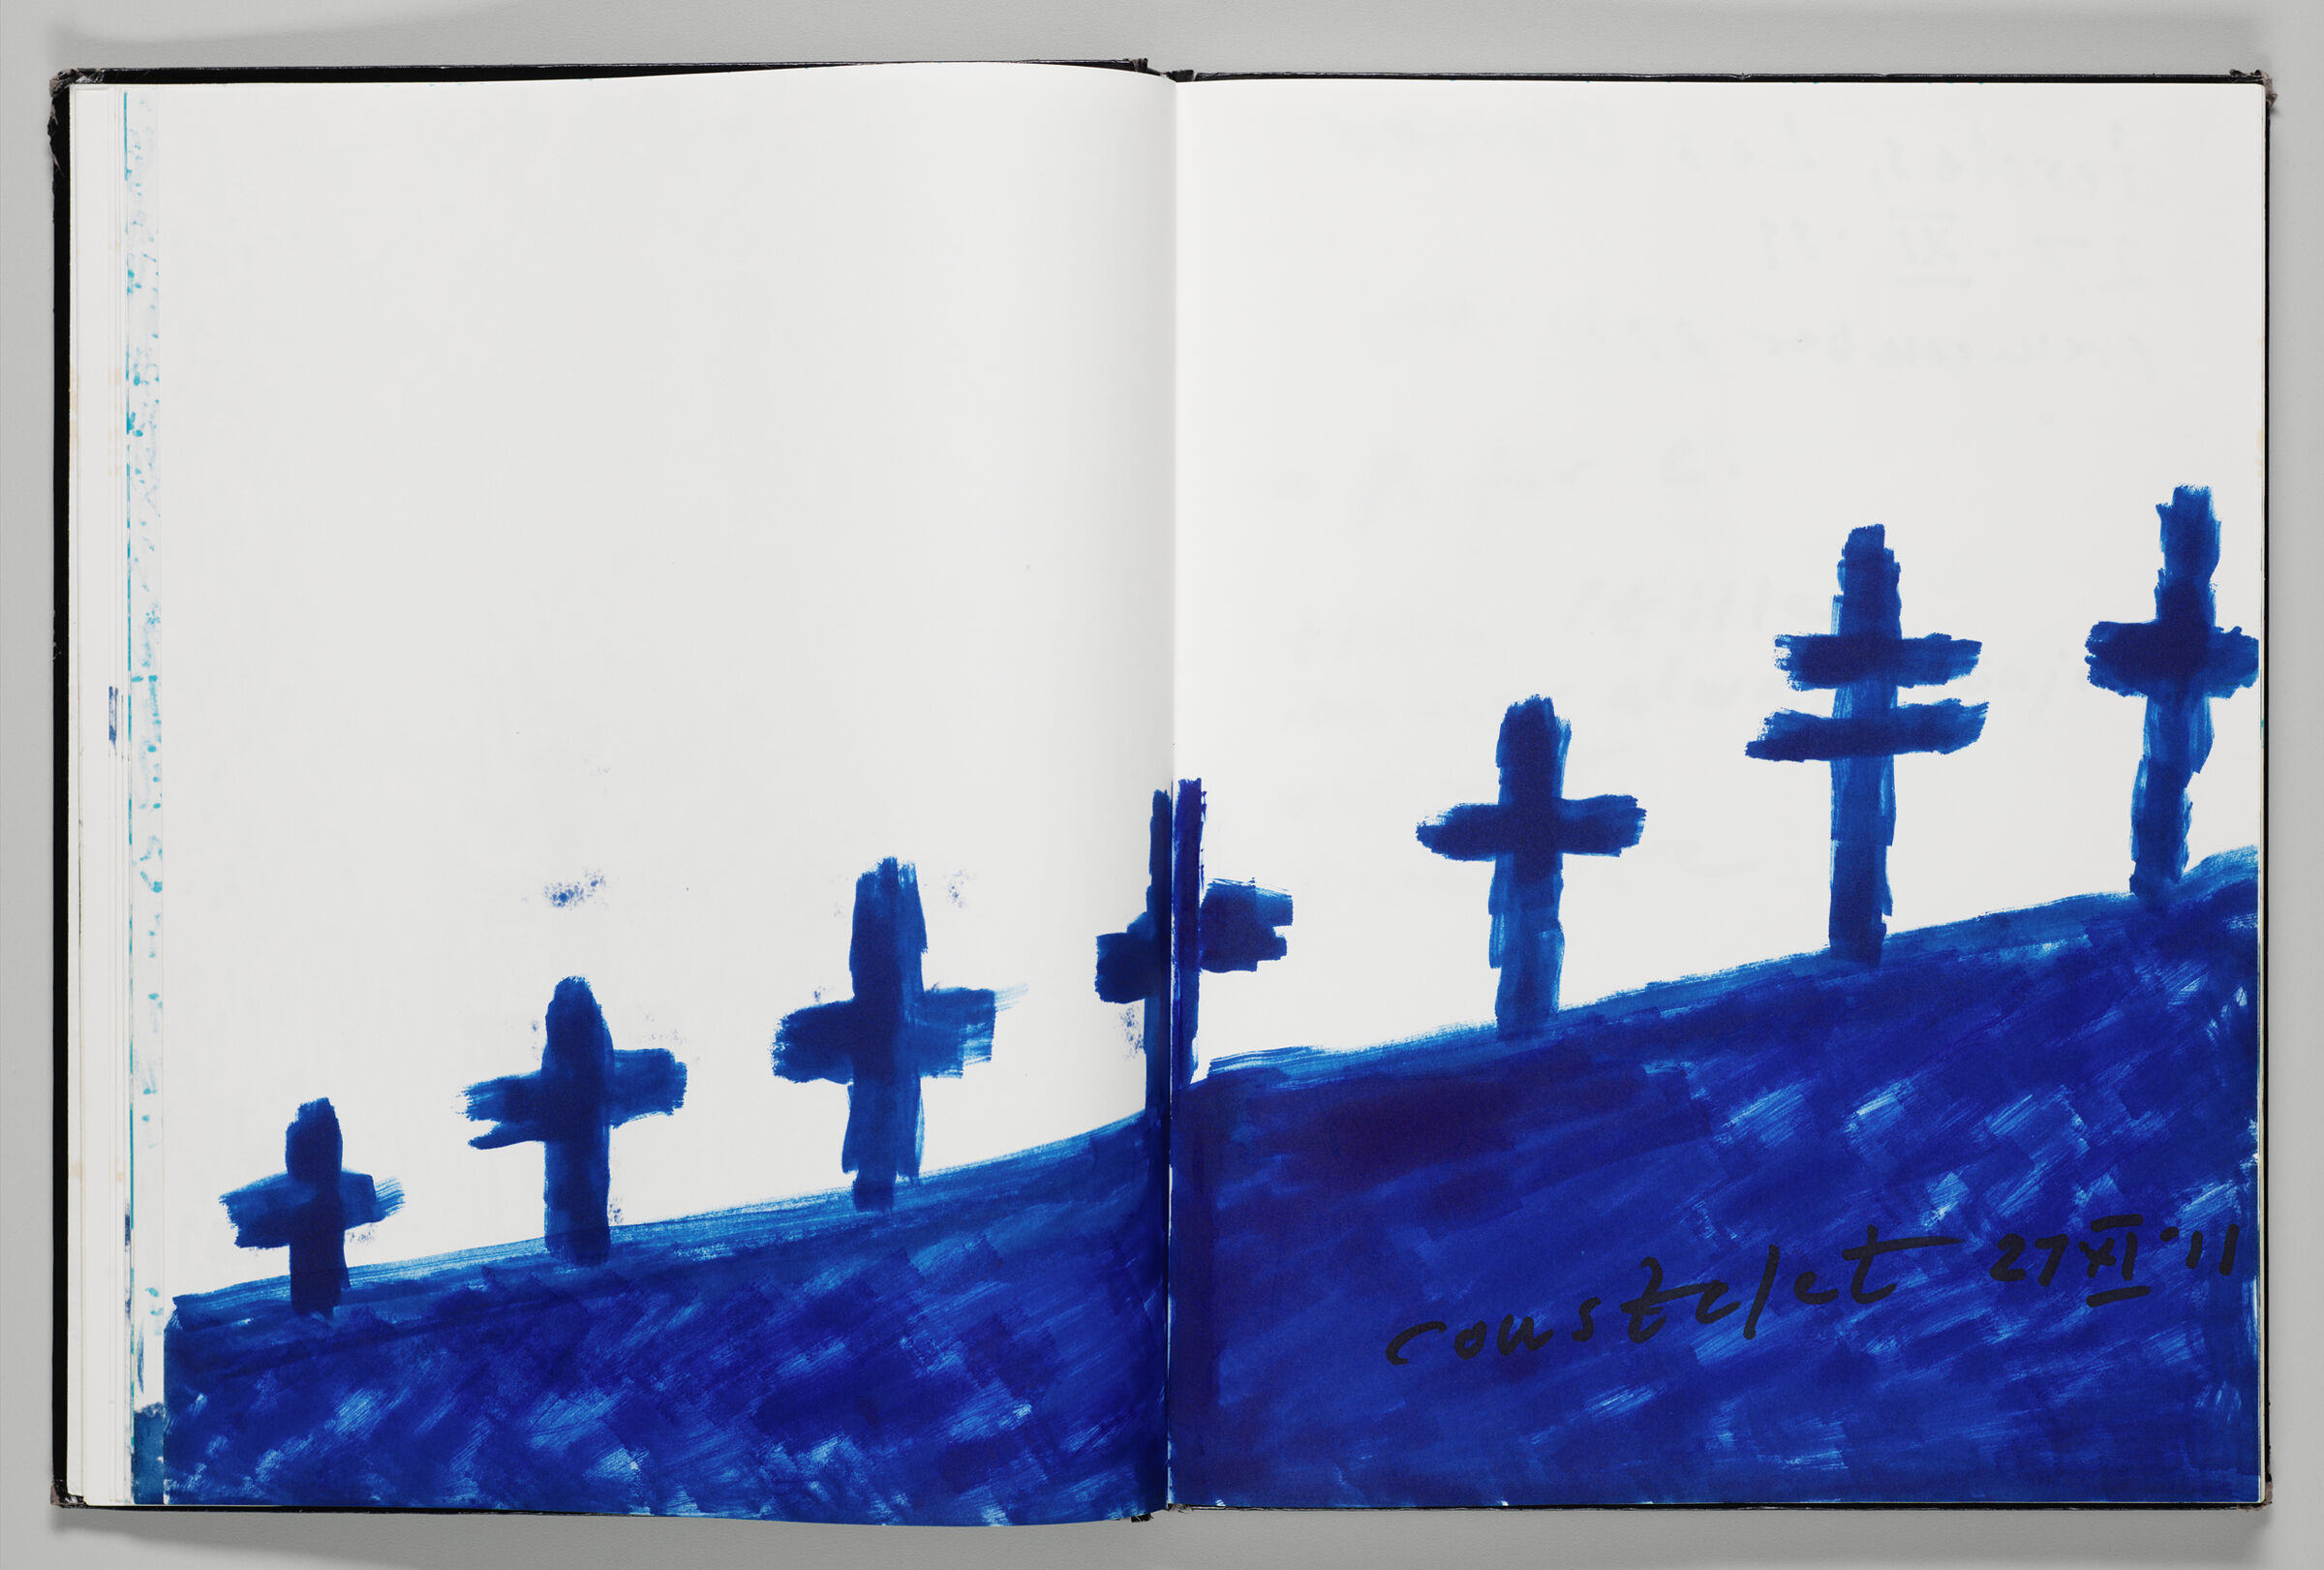 Untitled (Cemetery Near Carpentras, France, Two-Page Spread)